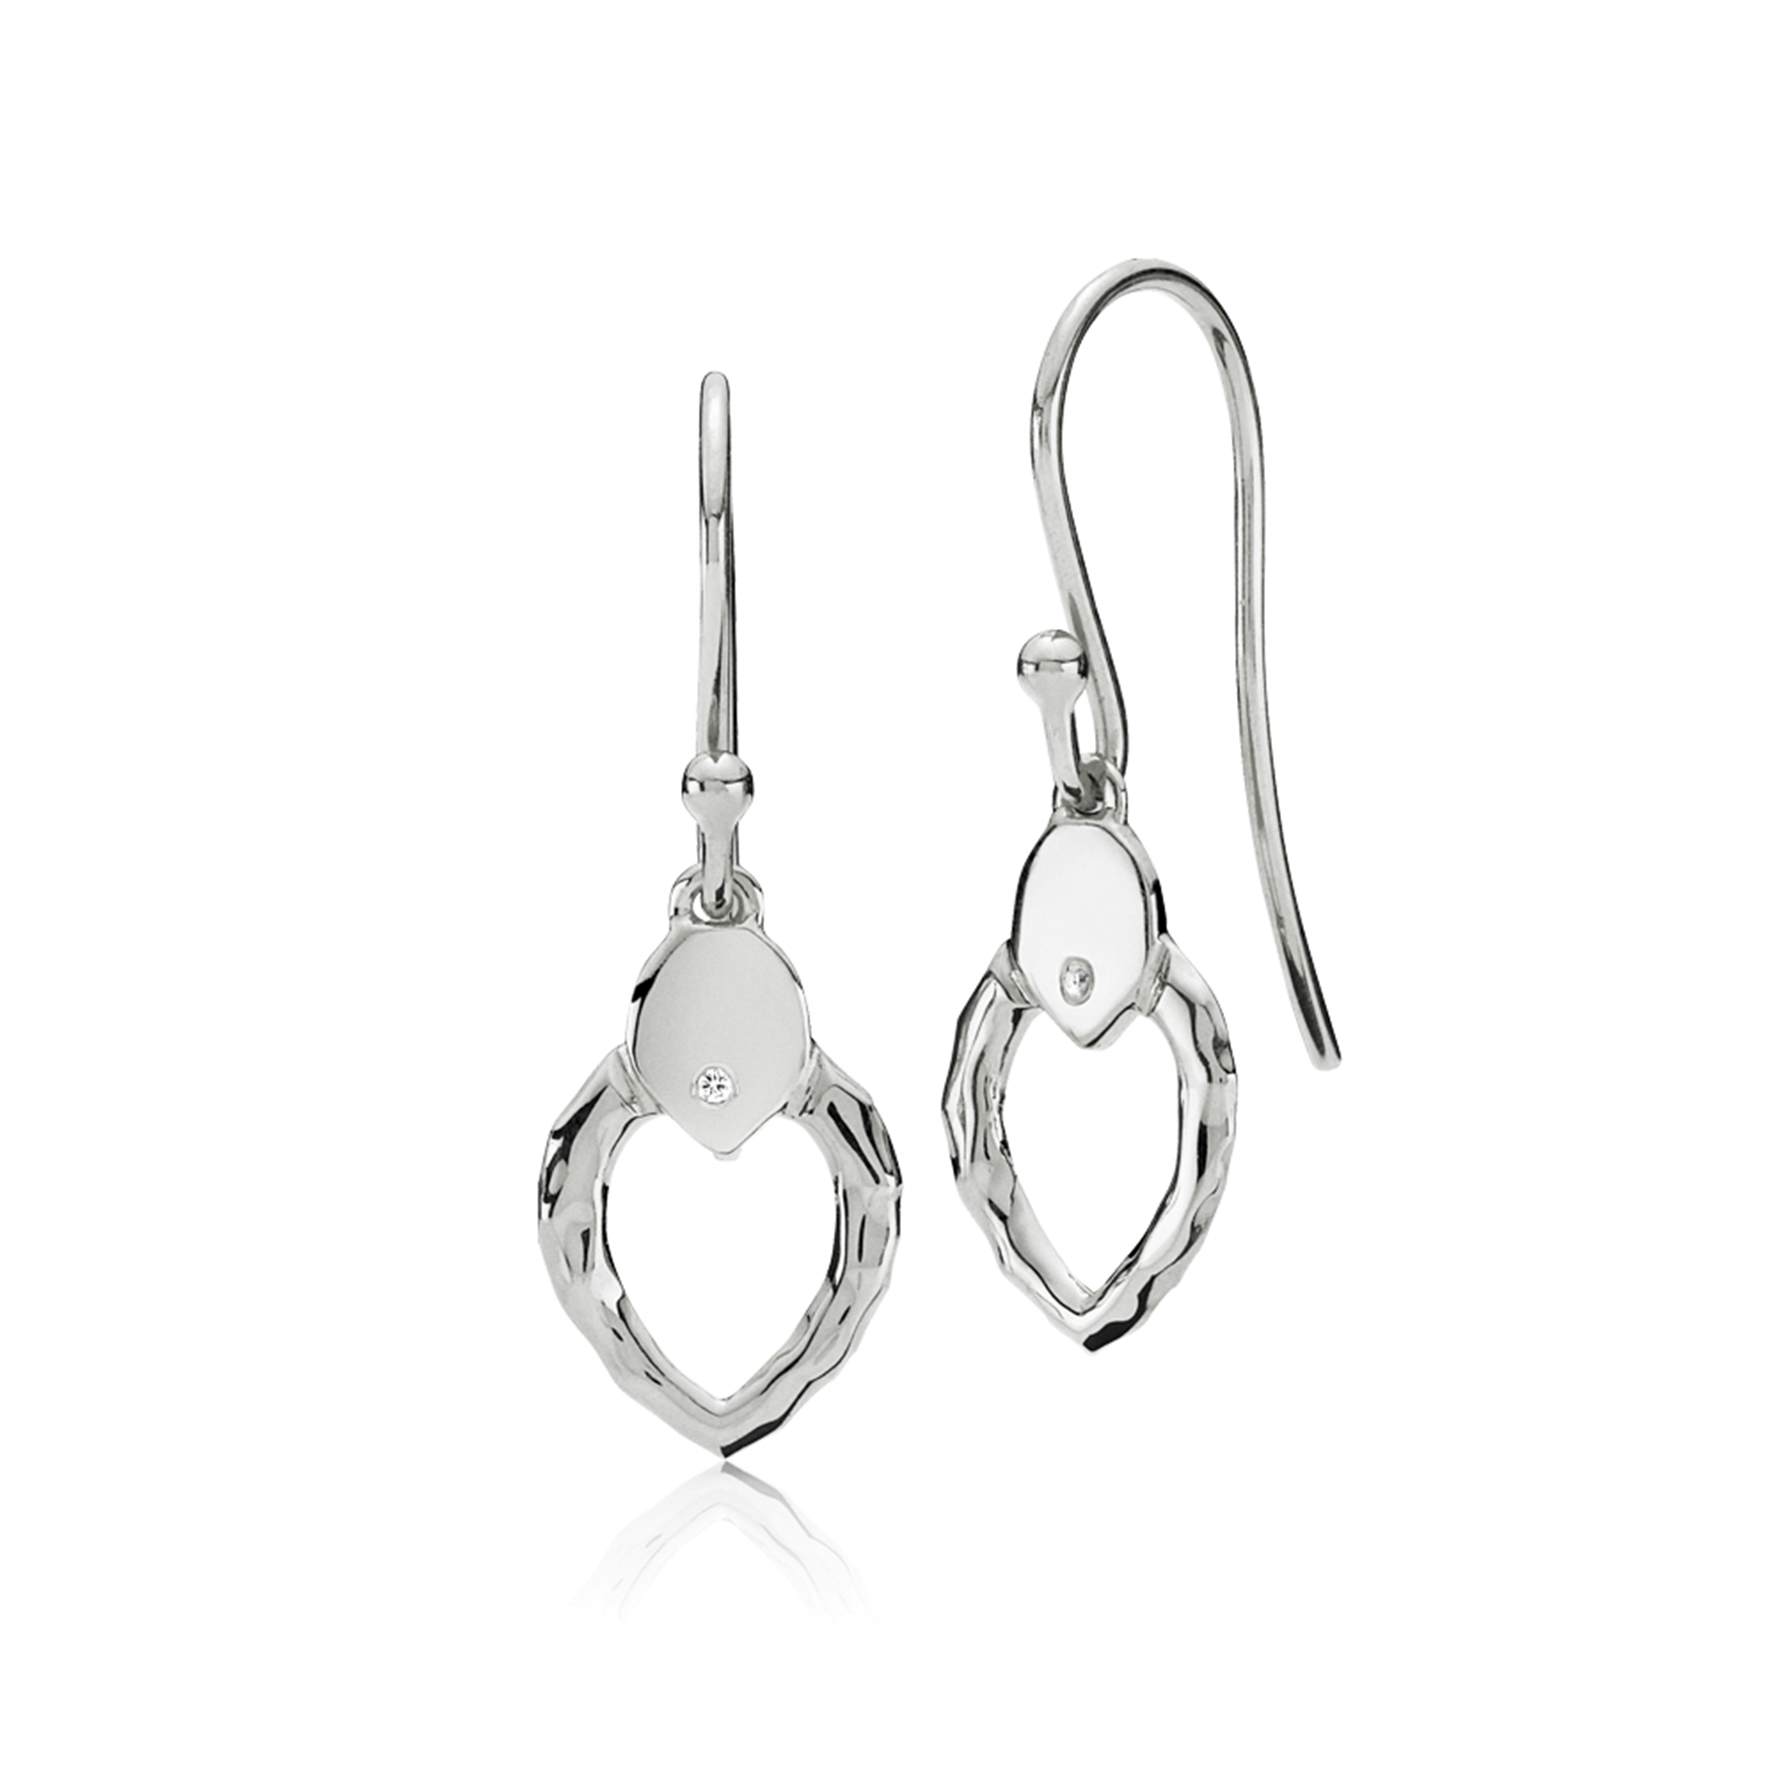 Cecilie Schmeichel Small Earrings von Izabel Camille in Silber Sterling 925